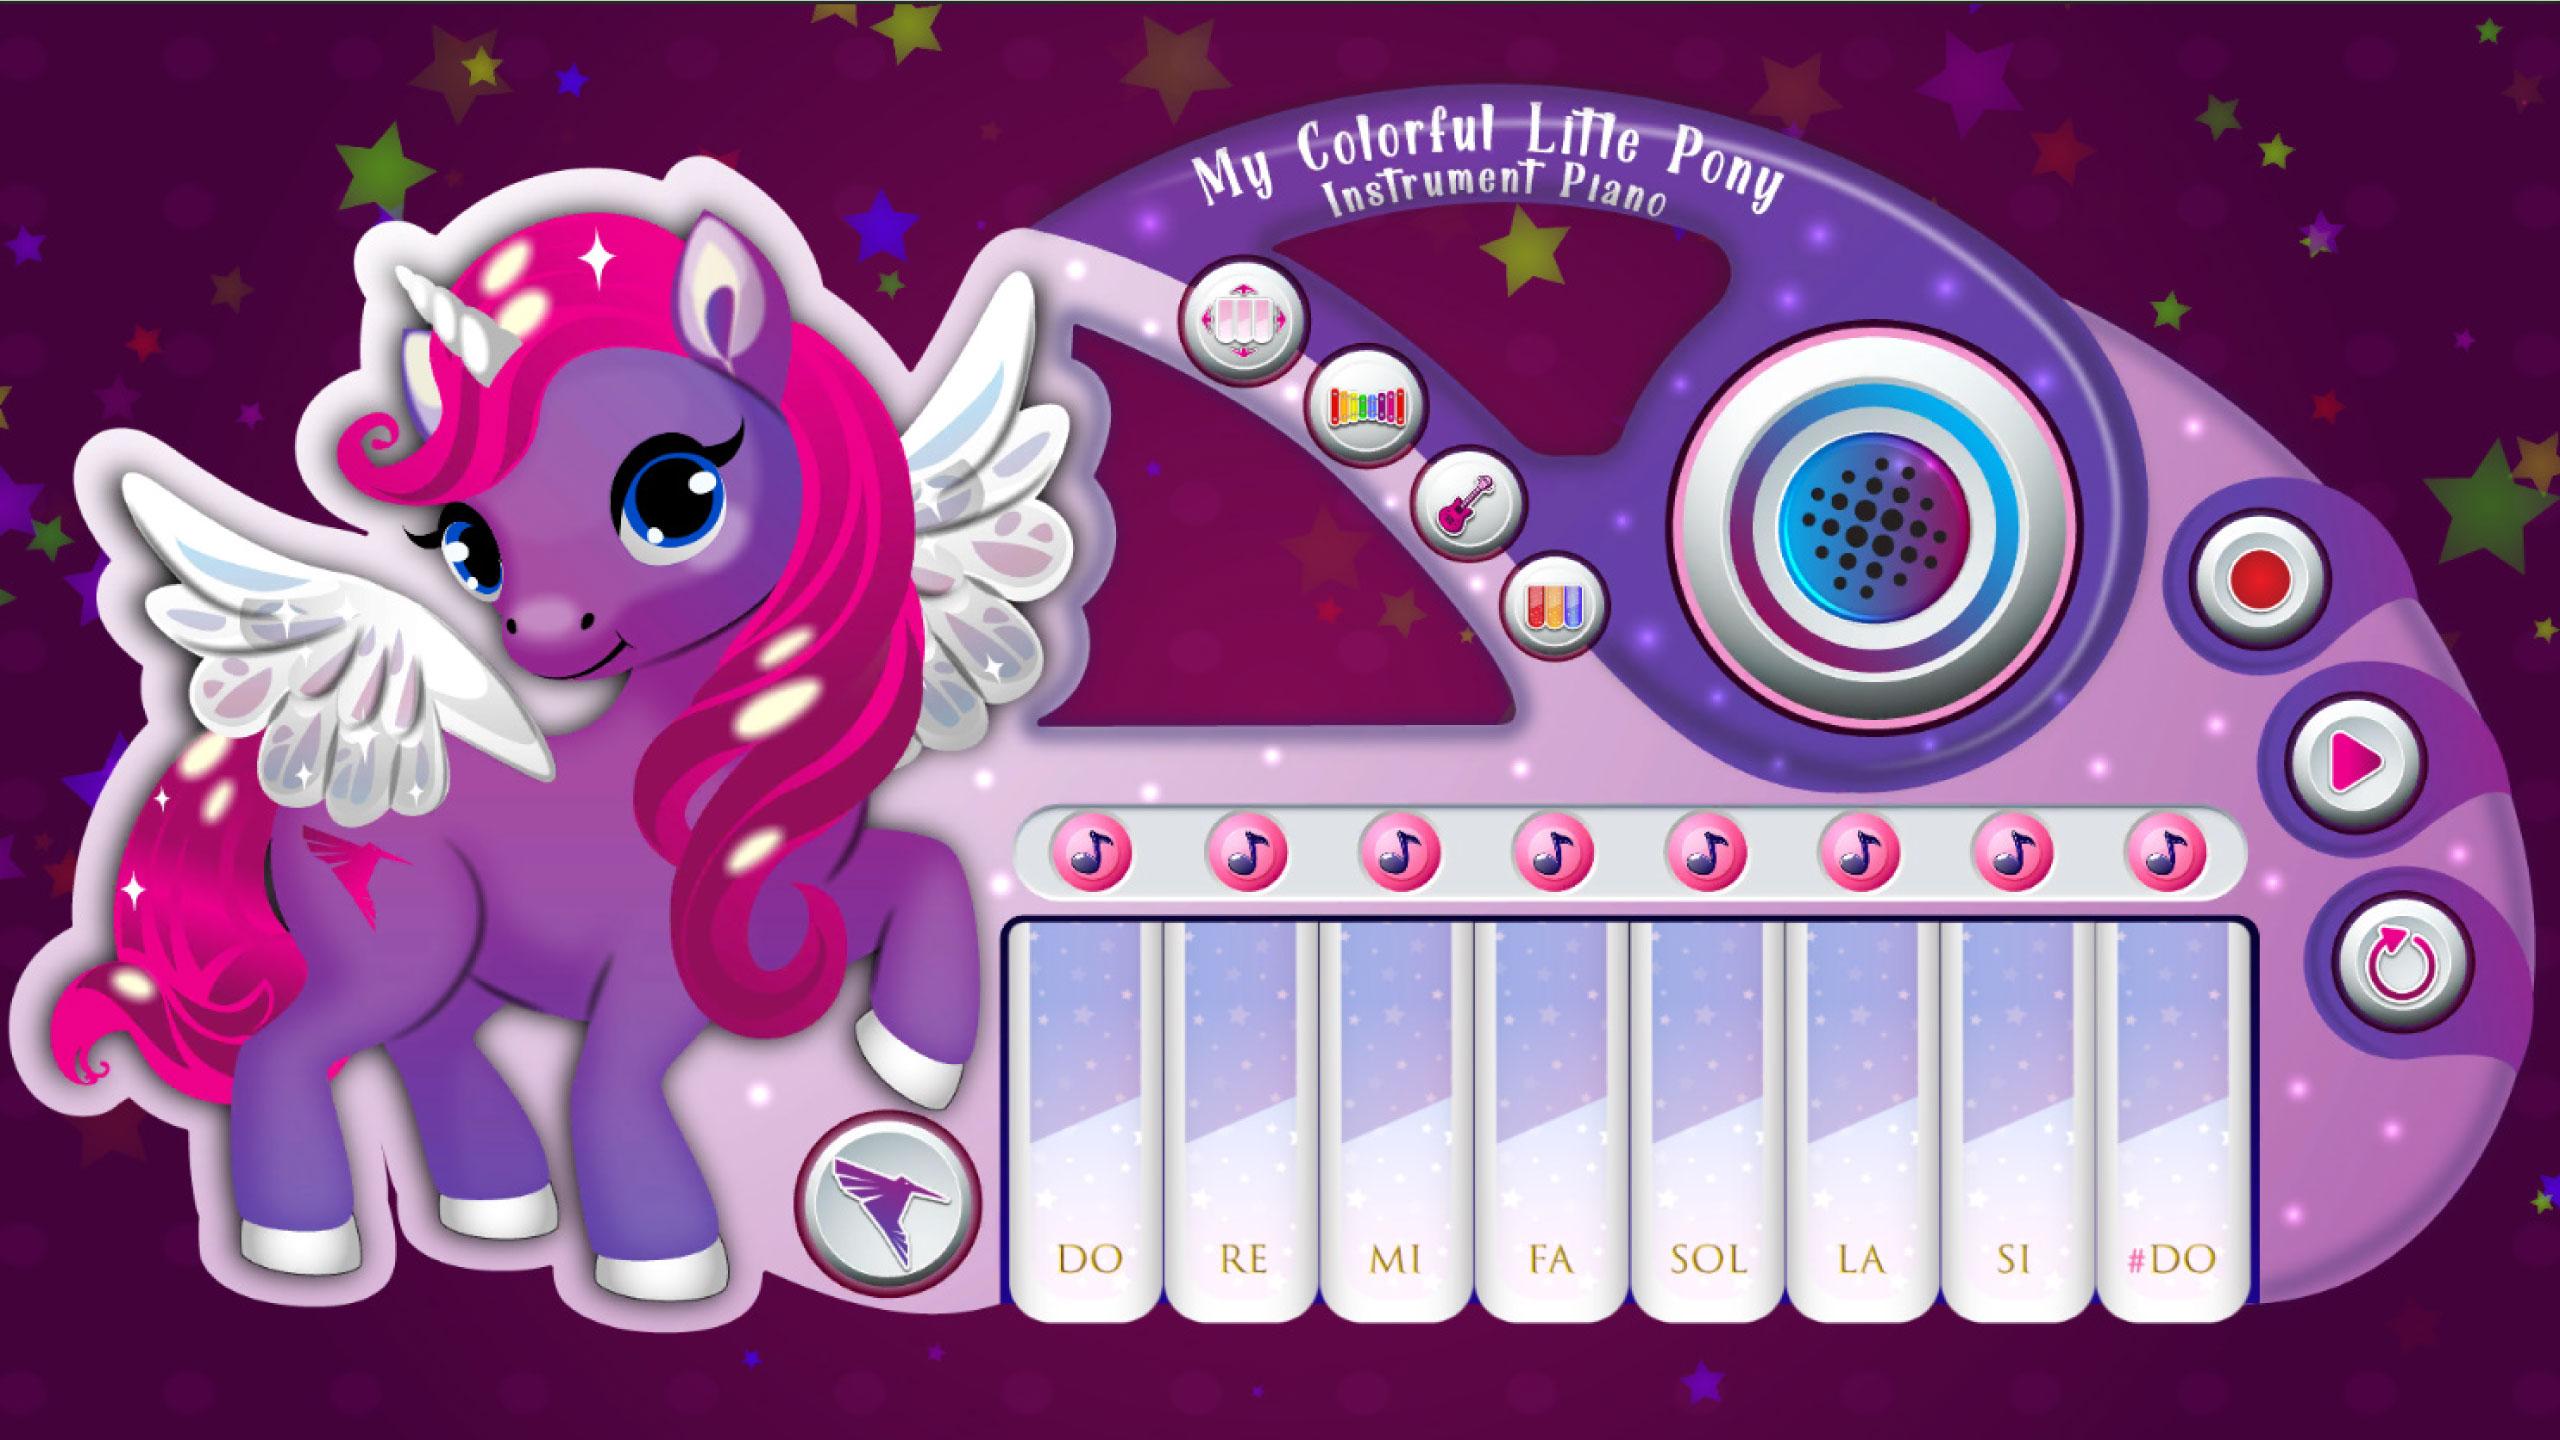 My Colorful Litle Pony Instrument - Piano 2.0 Screenshot 23